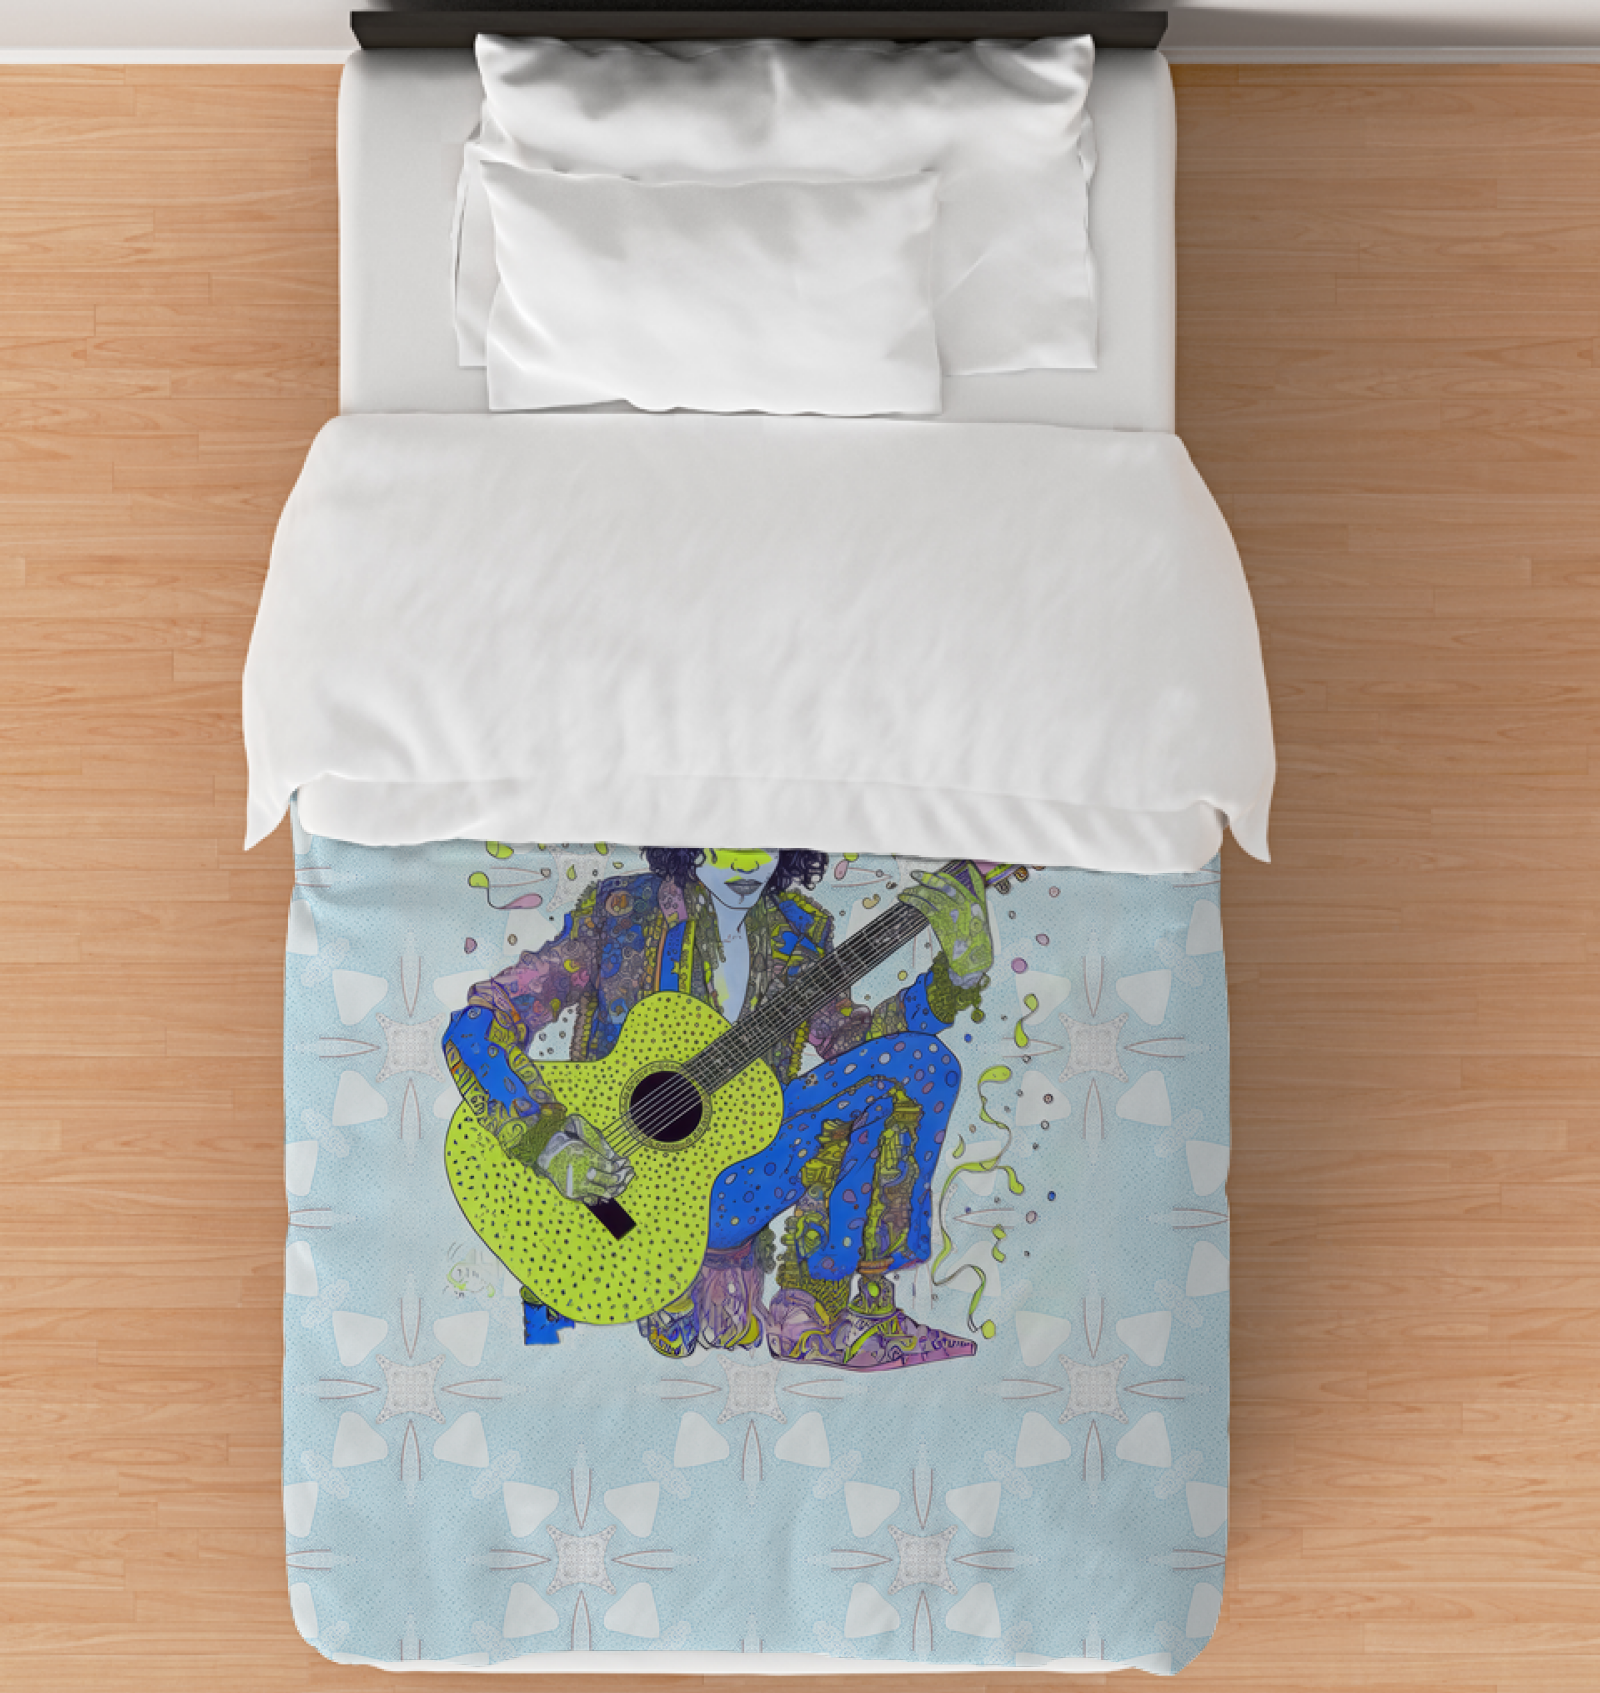 Poppy Paradise Bedding Comforter on a beautifully made bed.